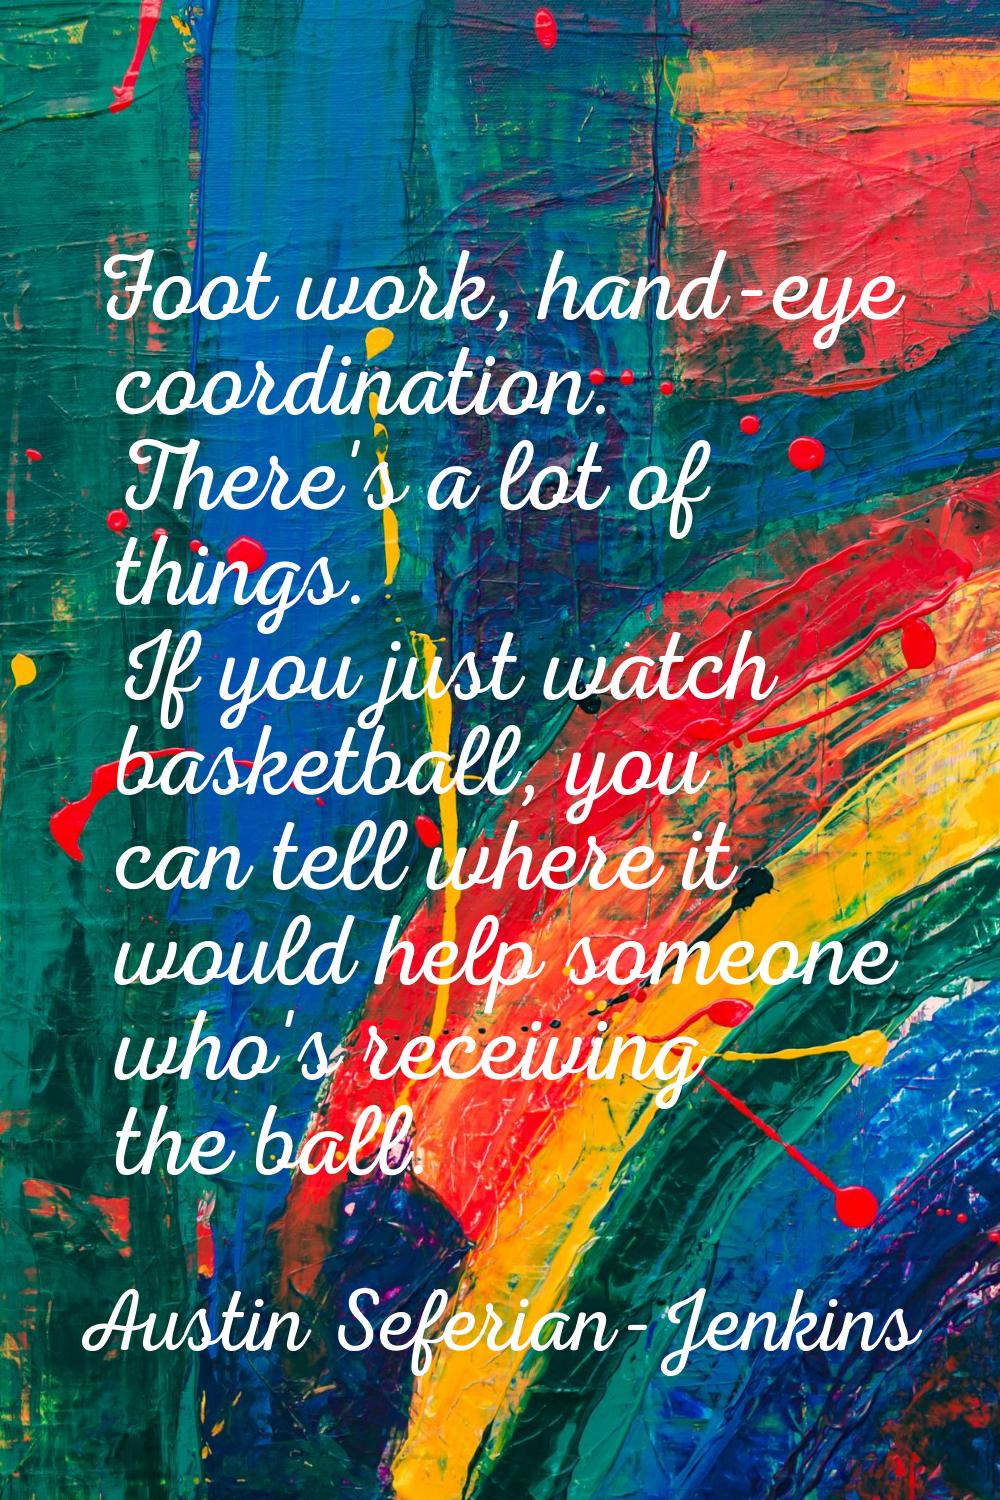 Foot work, hand-eye coordination. There's a lot of things. If you just watch basketball, you can te